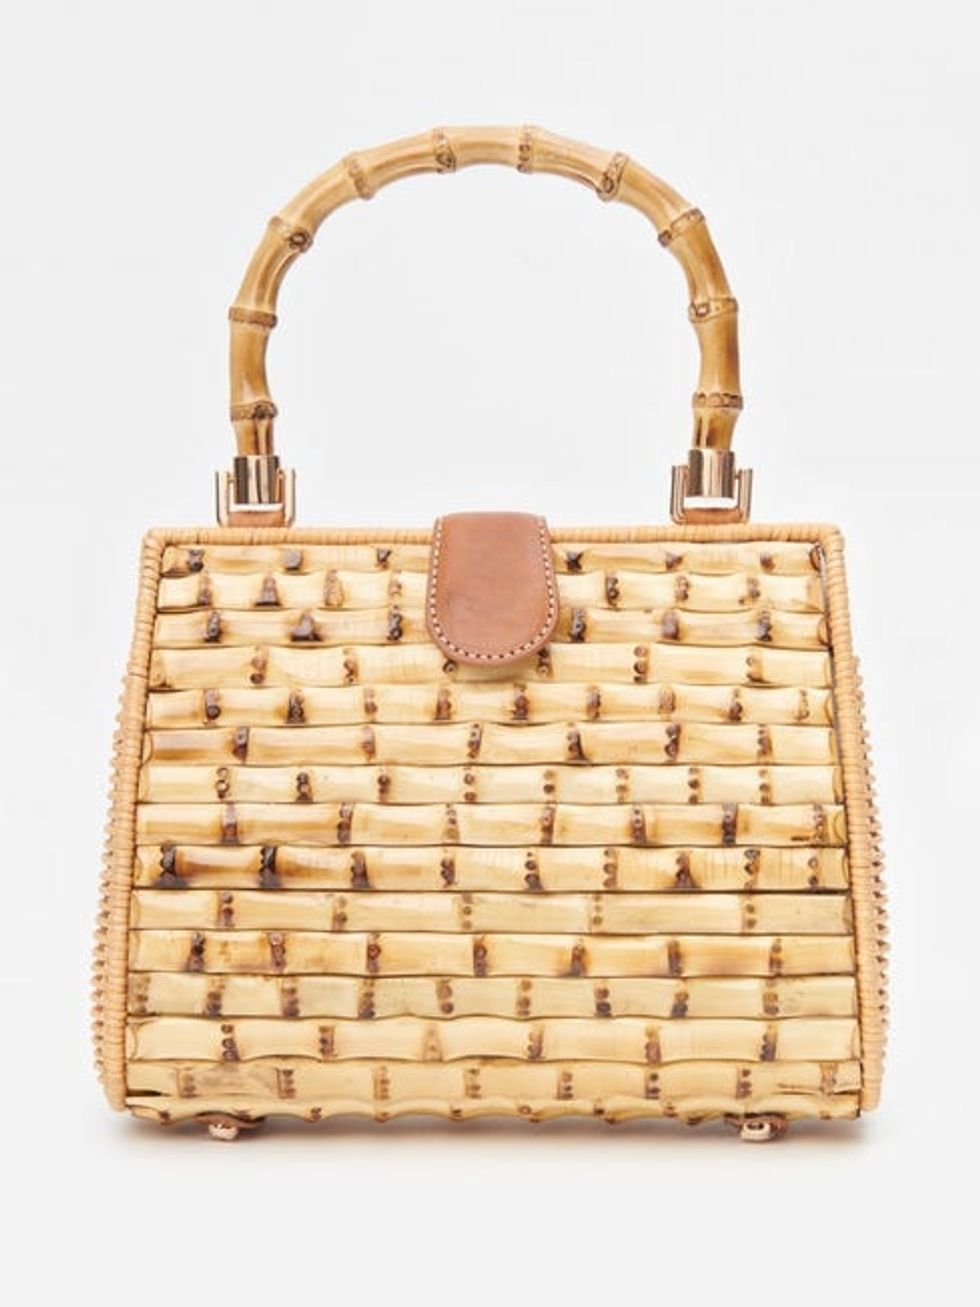 5 Purses You Need In Your Closet Now - xoNecole